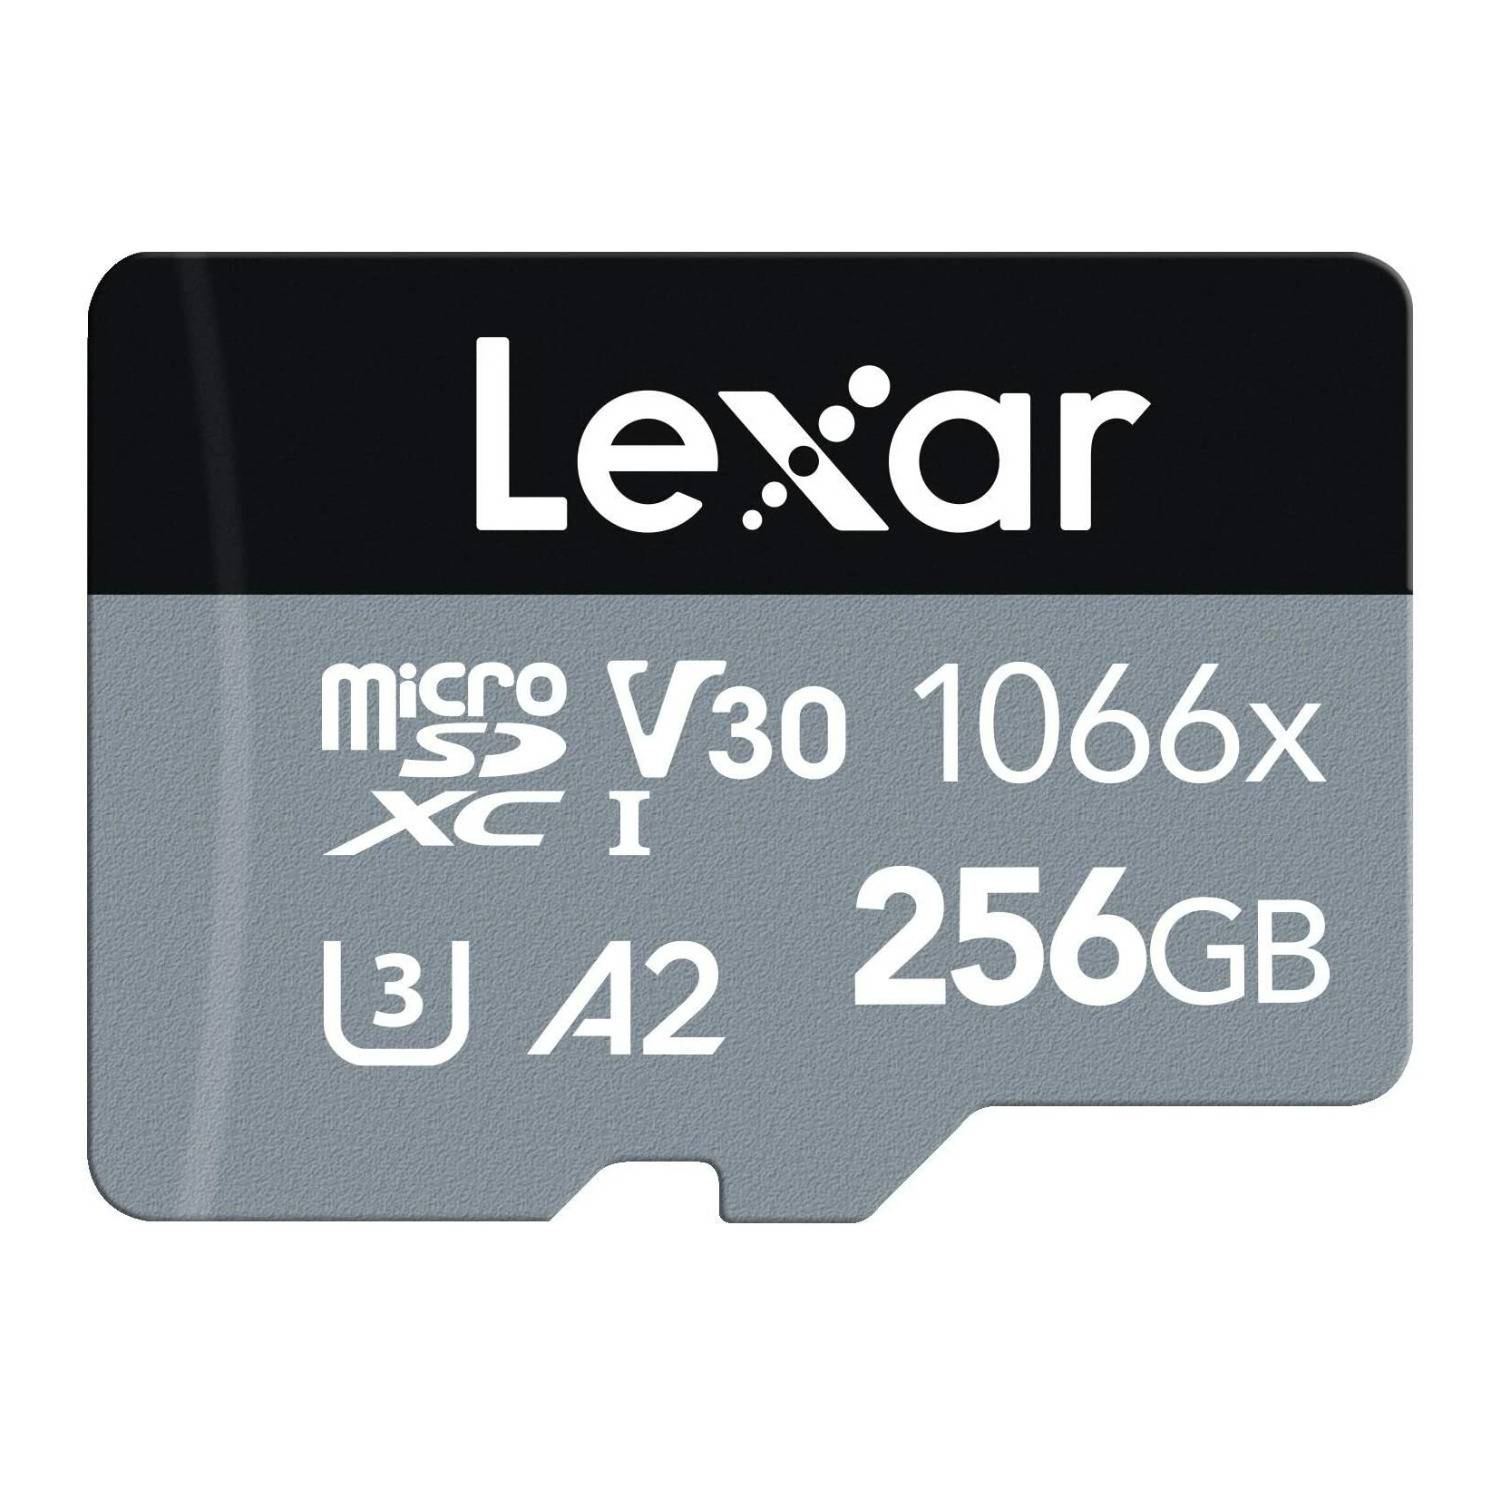 Lexar Silver Series Professional 256GB 1066x UHS-I microSDXC Card with Adapter